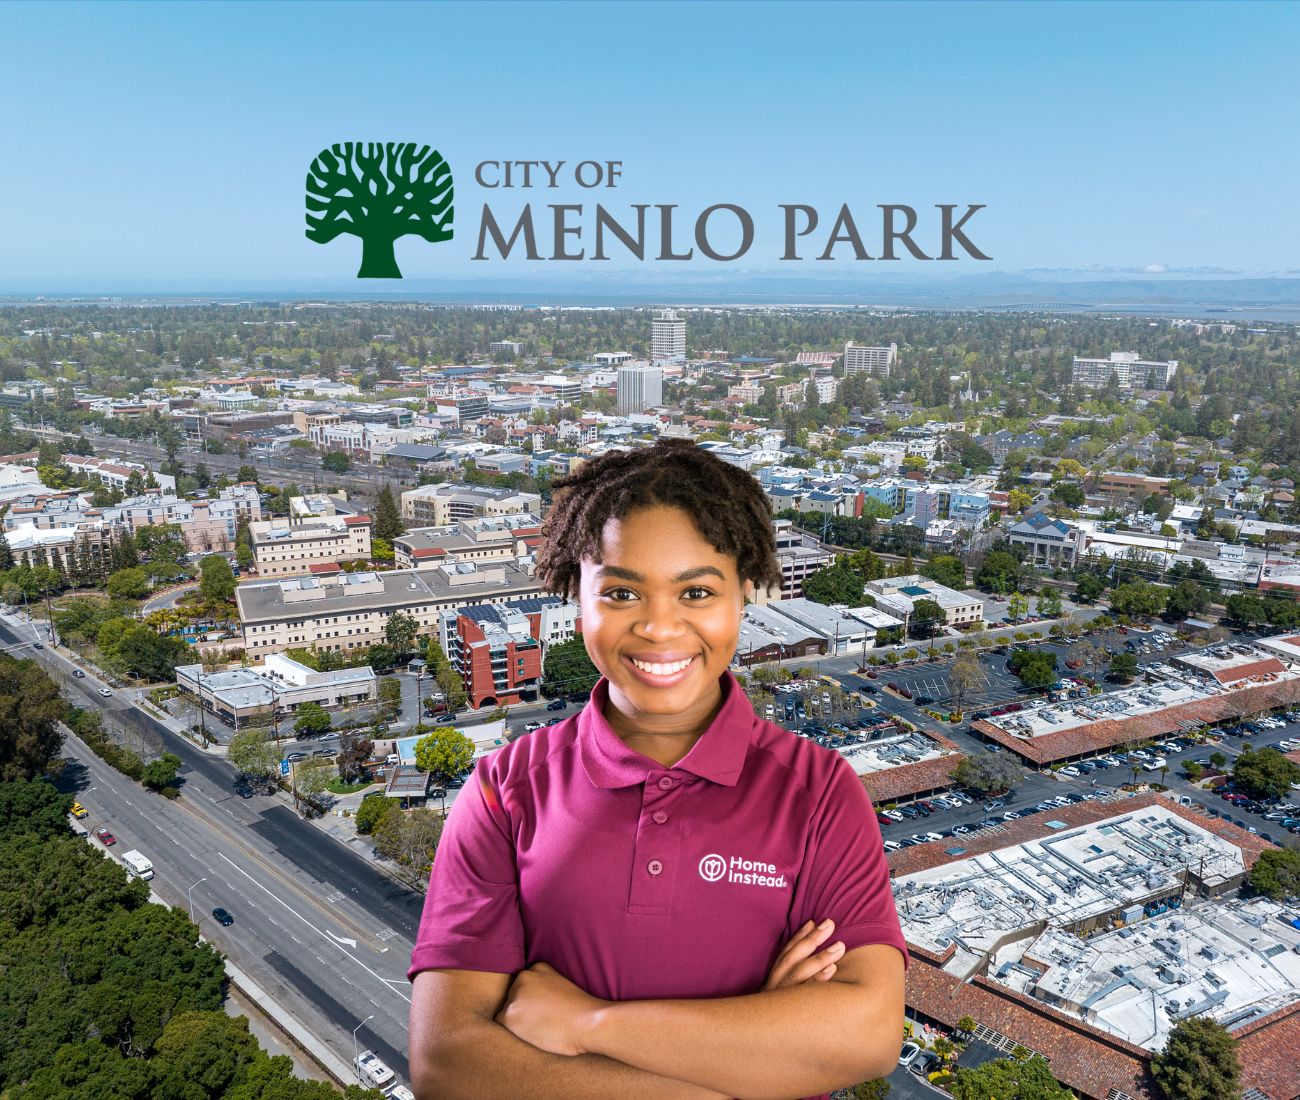 Home Instead caregiver with Menlo Park California in the background